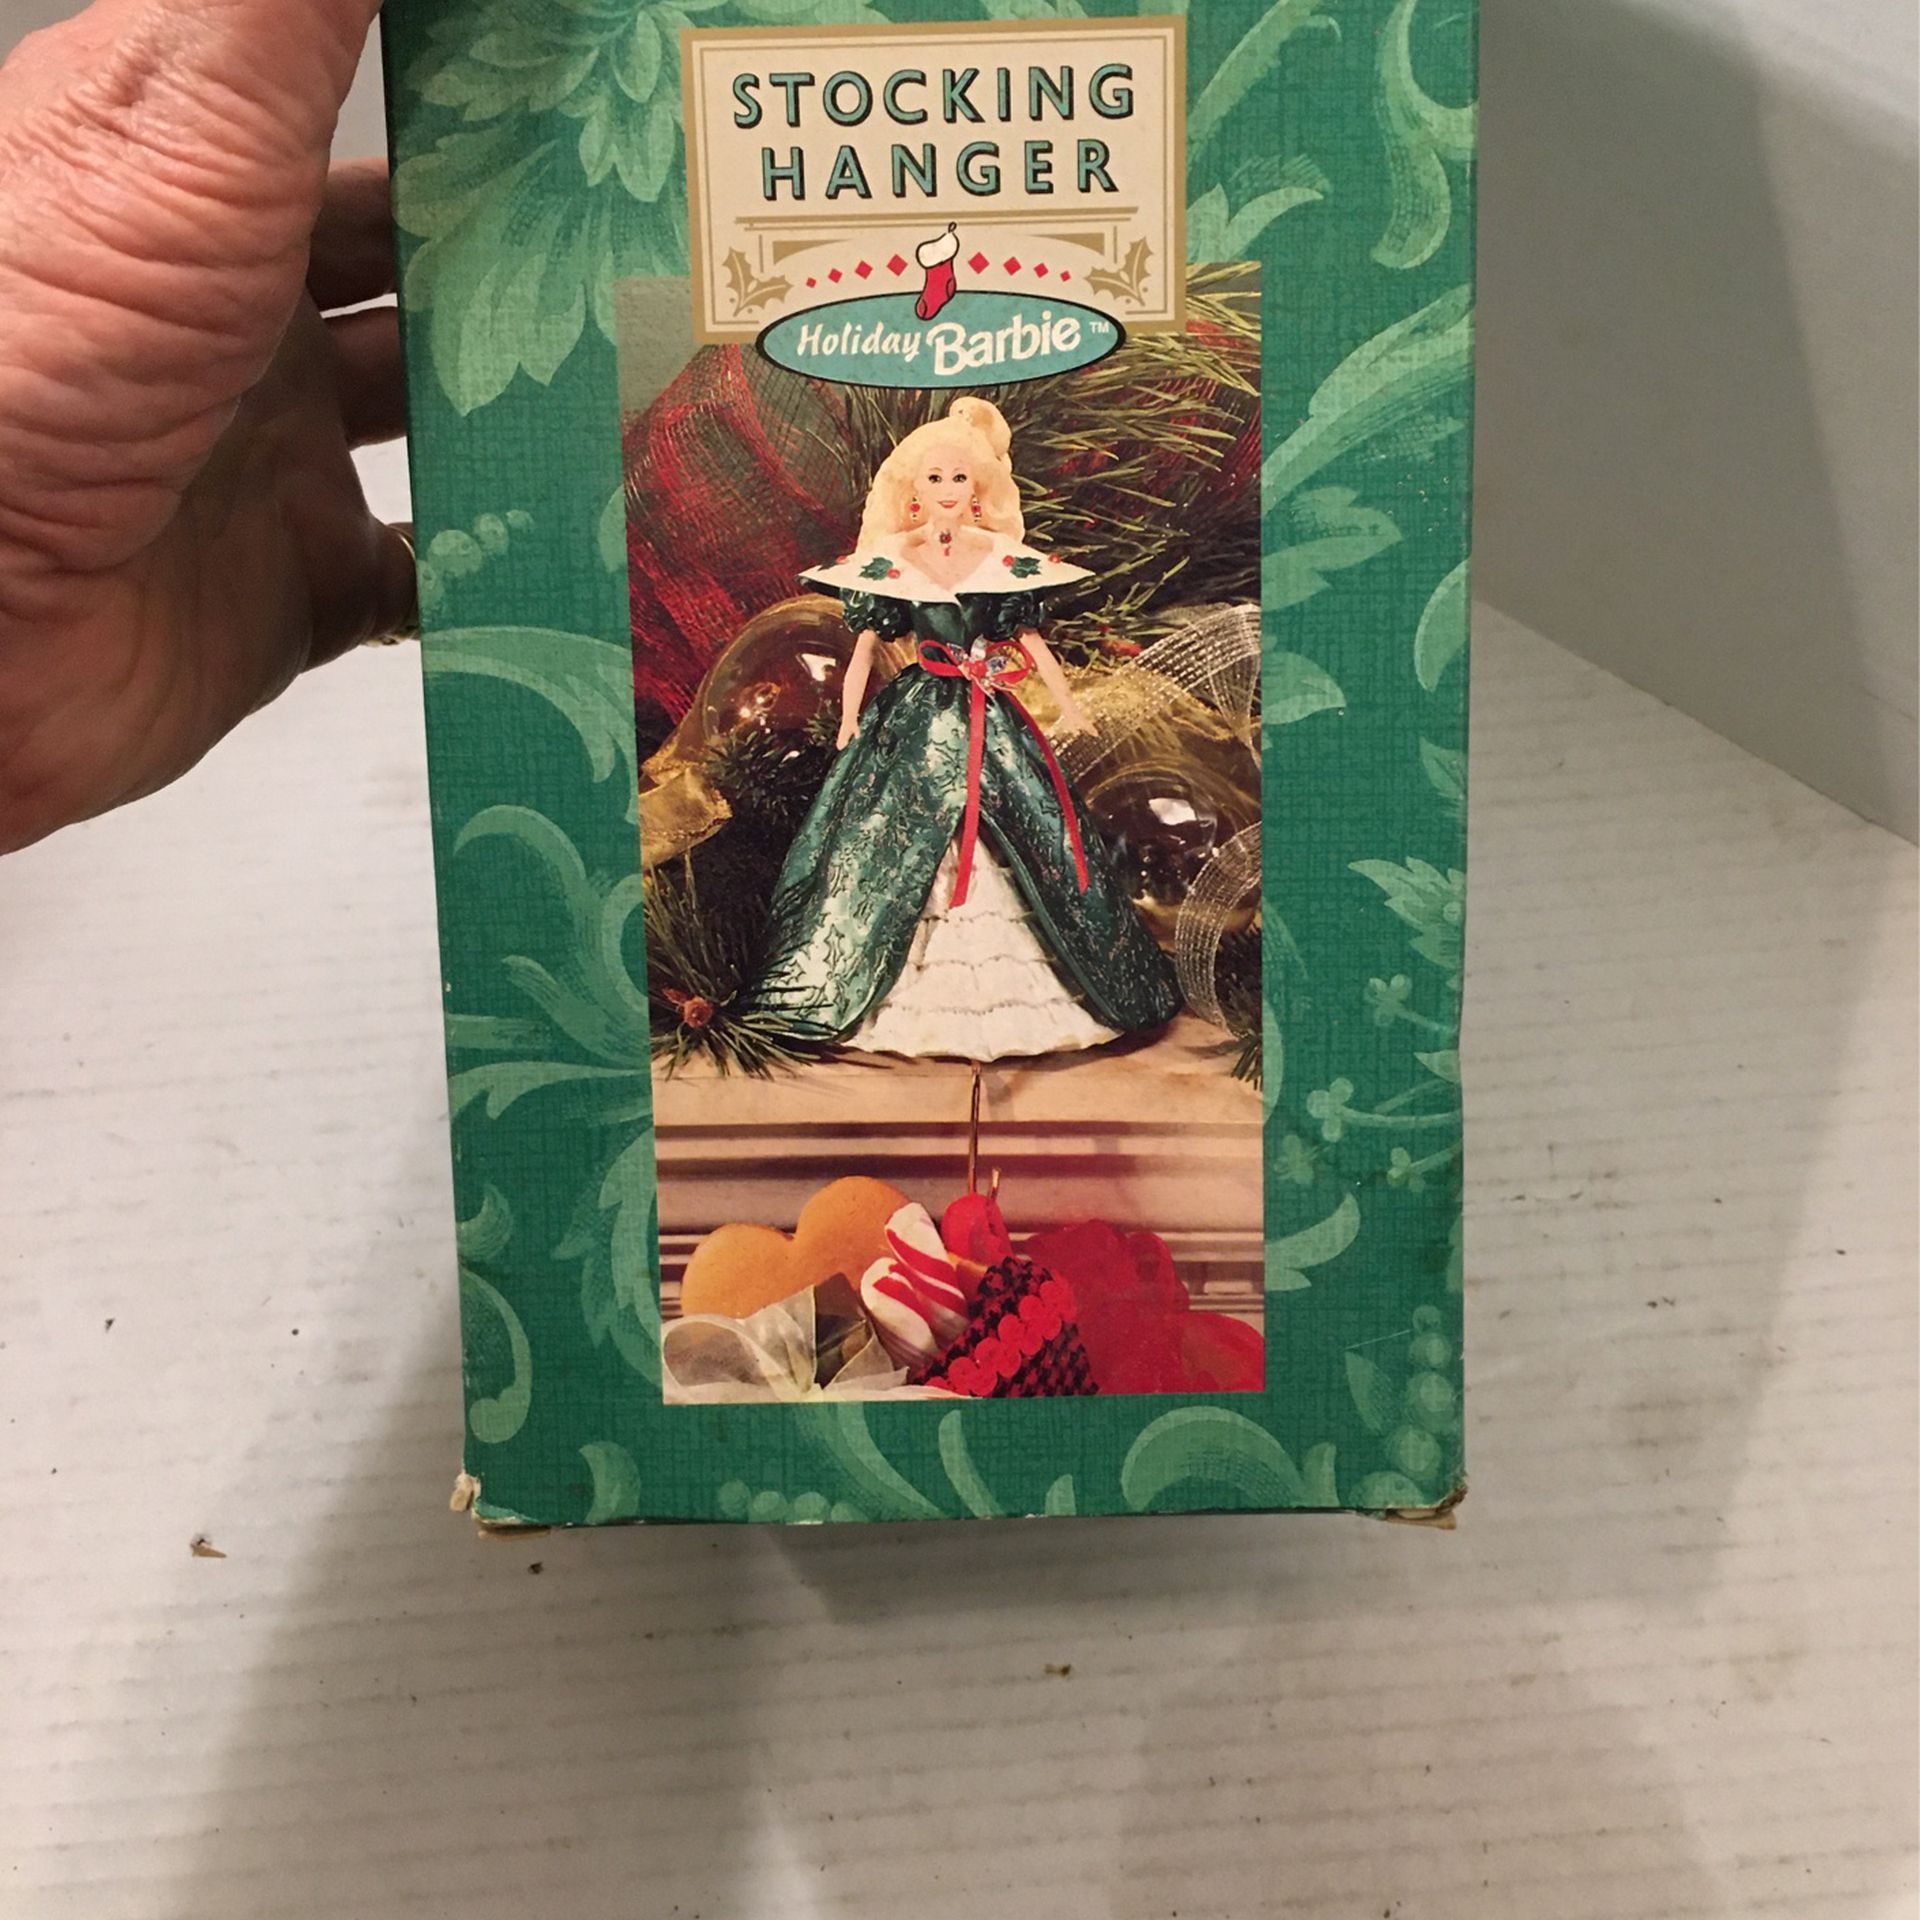 1996 holiday Barbie stocking hanger mint condition